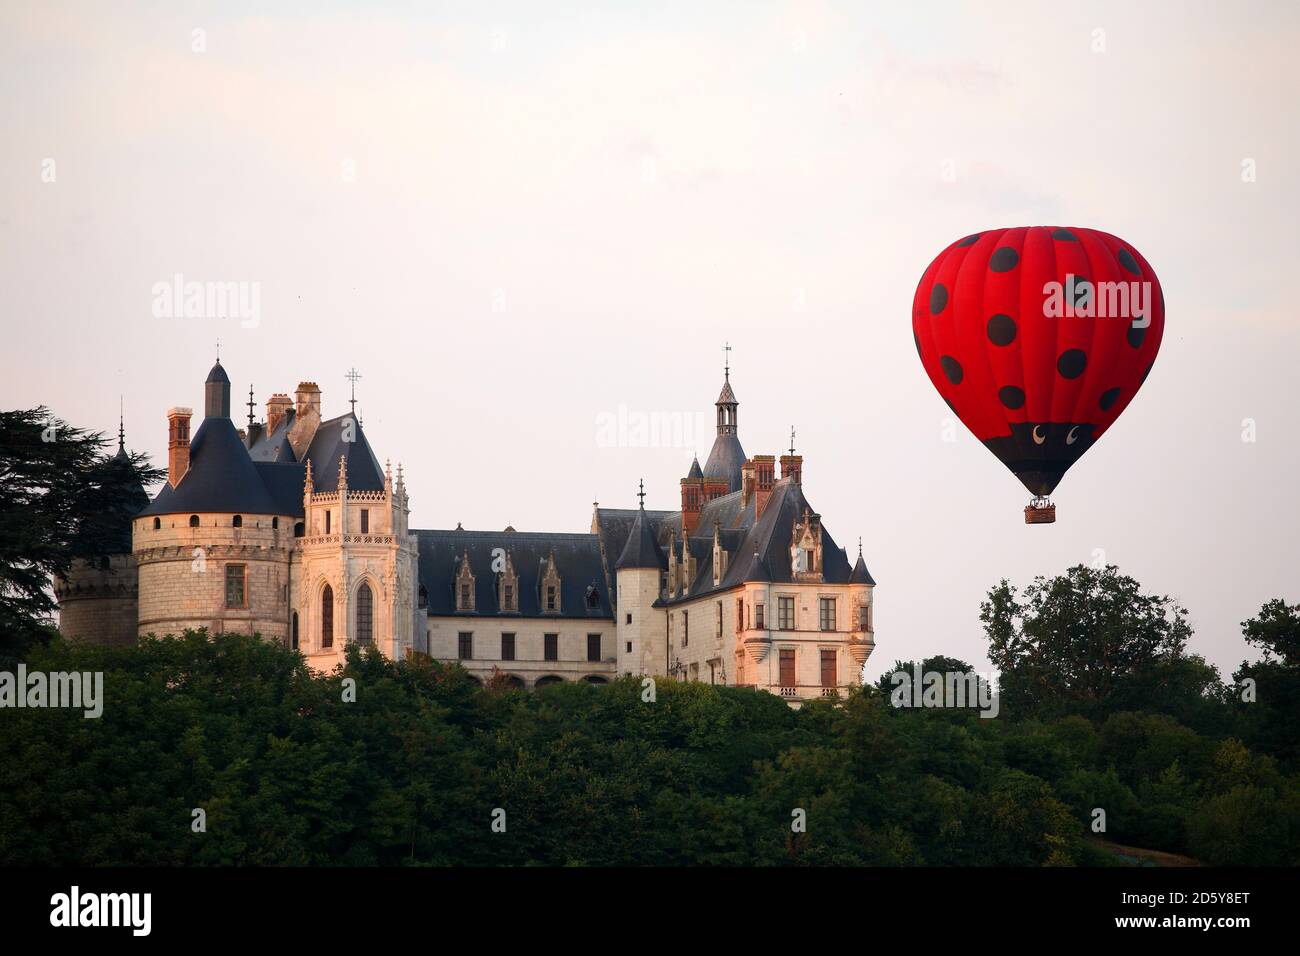 France, Chaumont-sur-Loire, view to Chateau de Chaumont and air balloon in the foreground Stock Photo